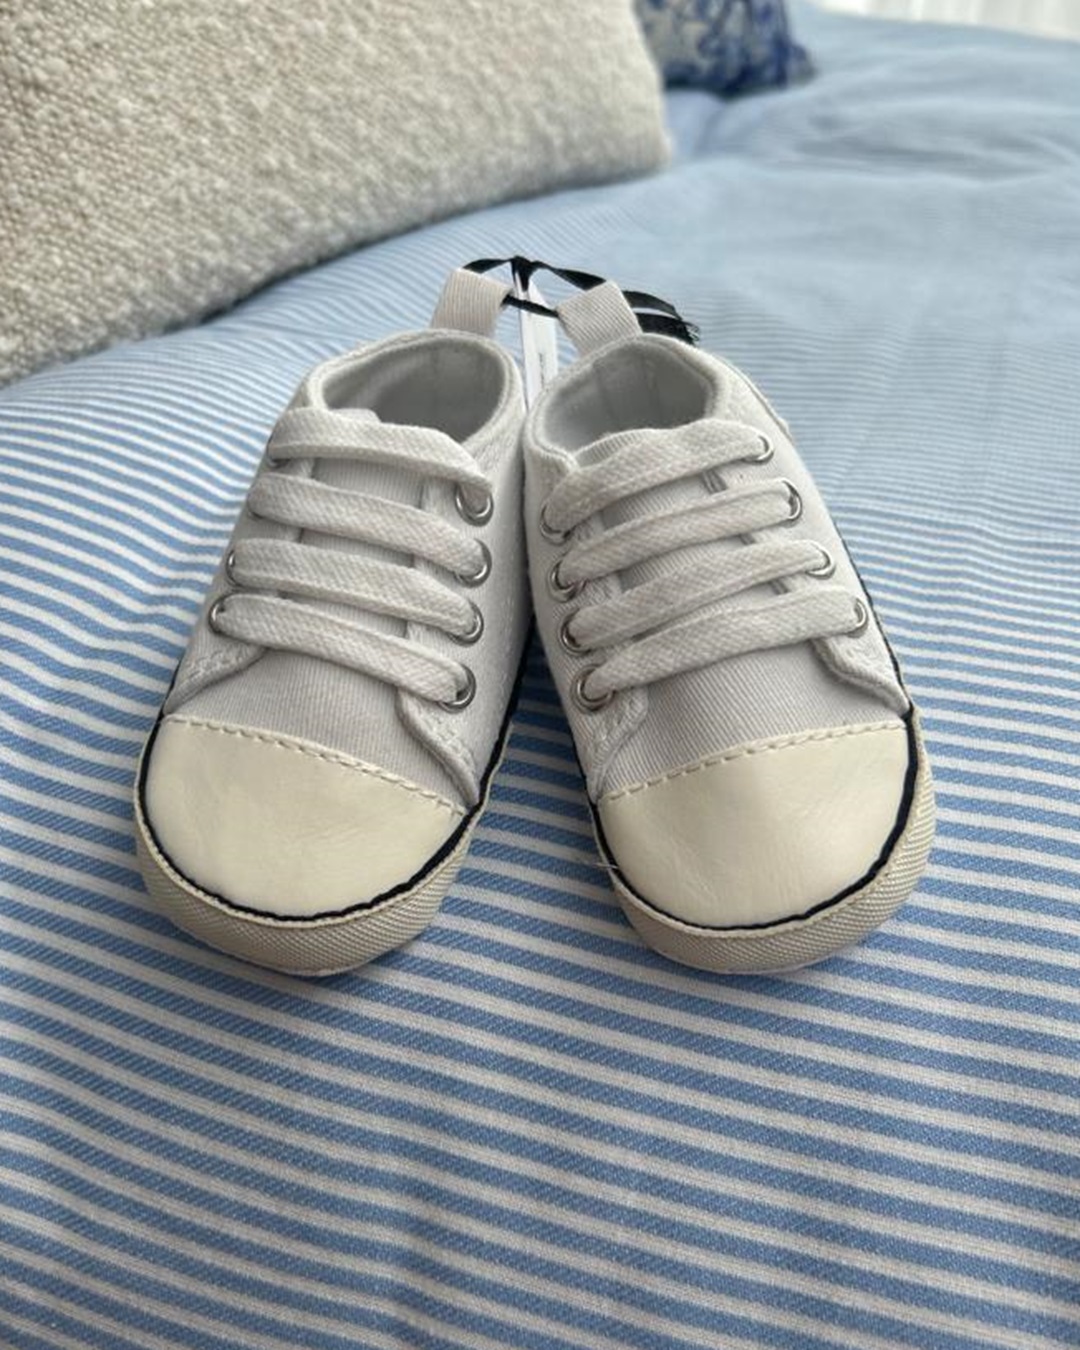 Baby canvas shoes white with white laces